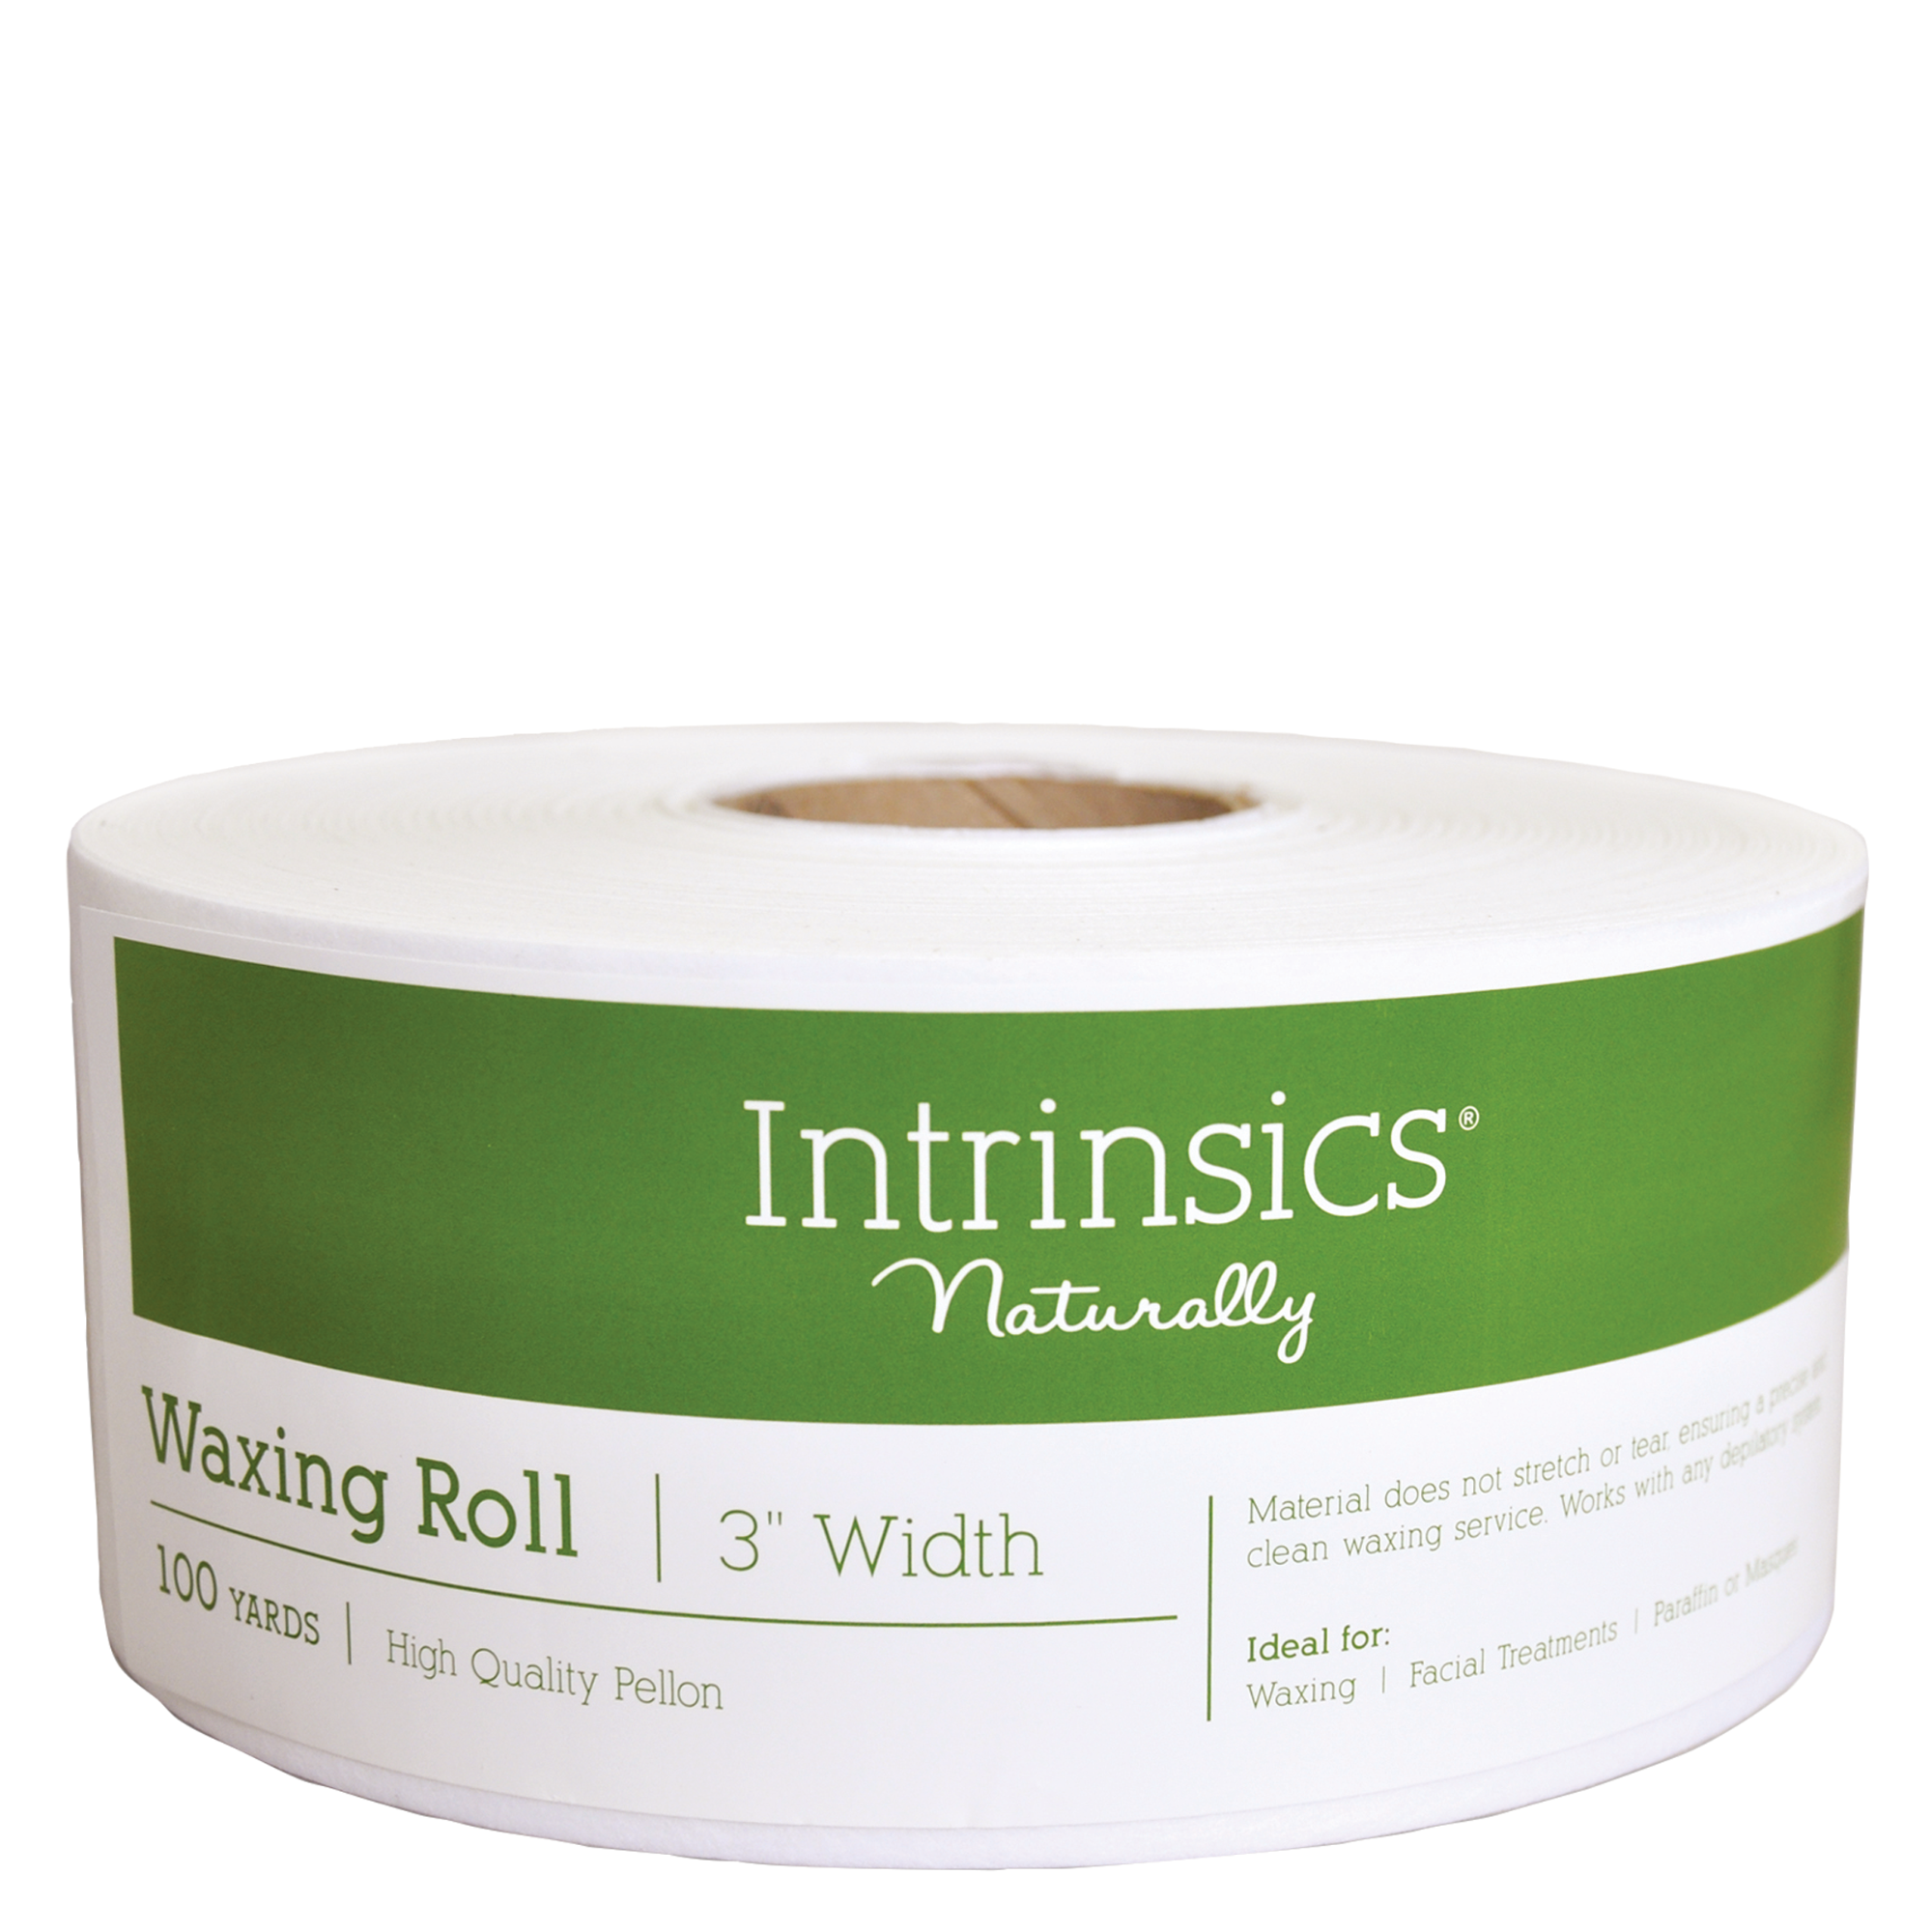 Nonwoven Waxing Roll - 100 yards